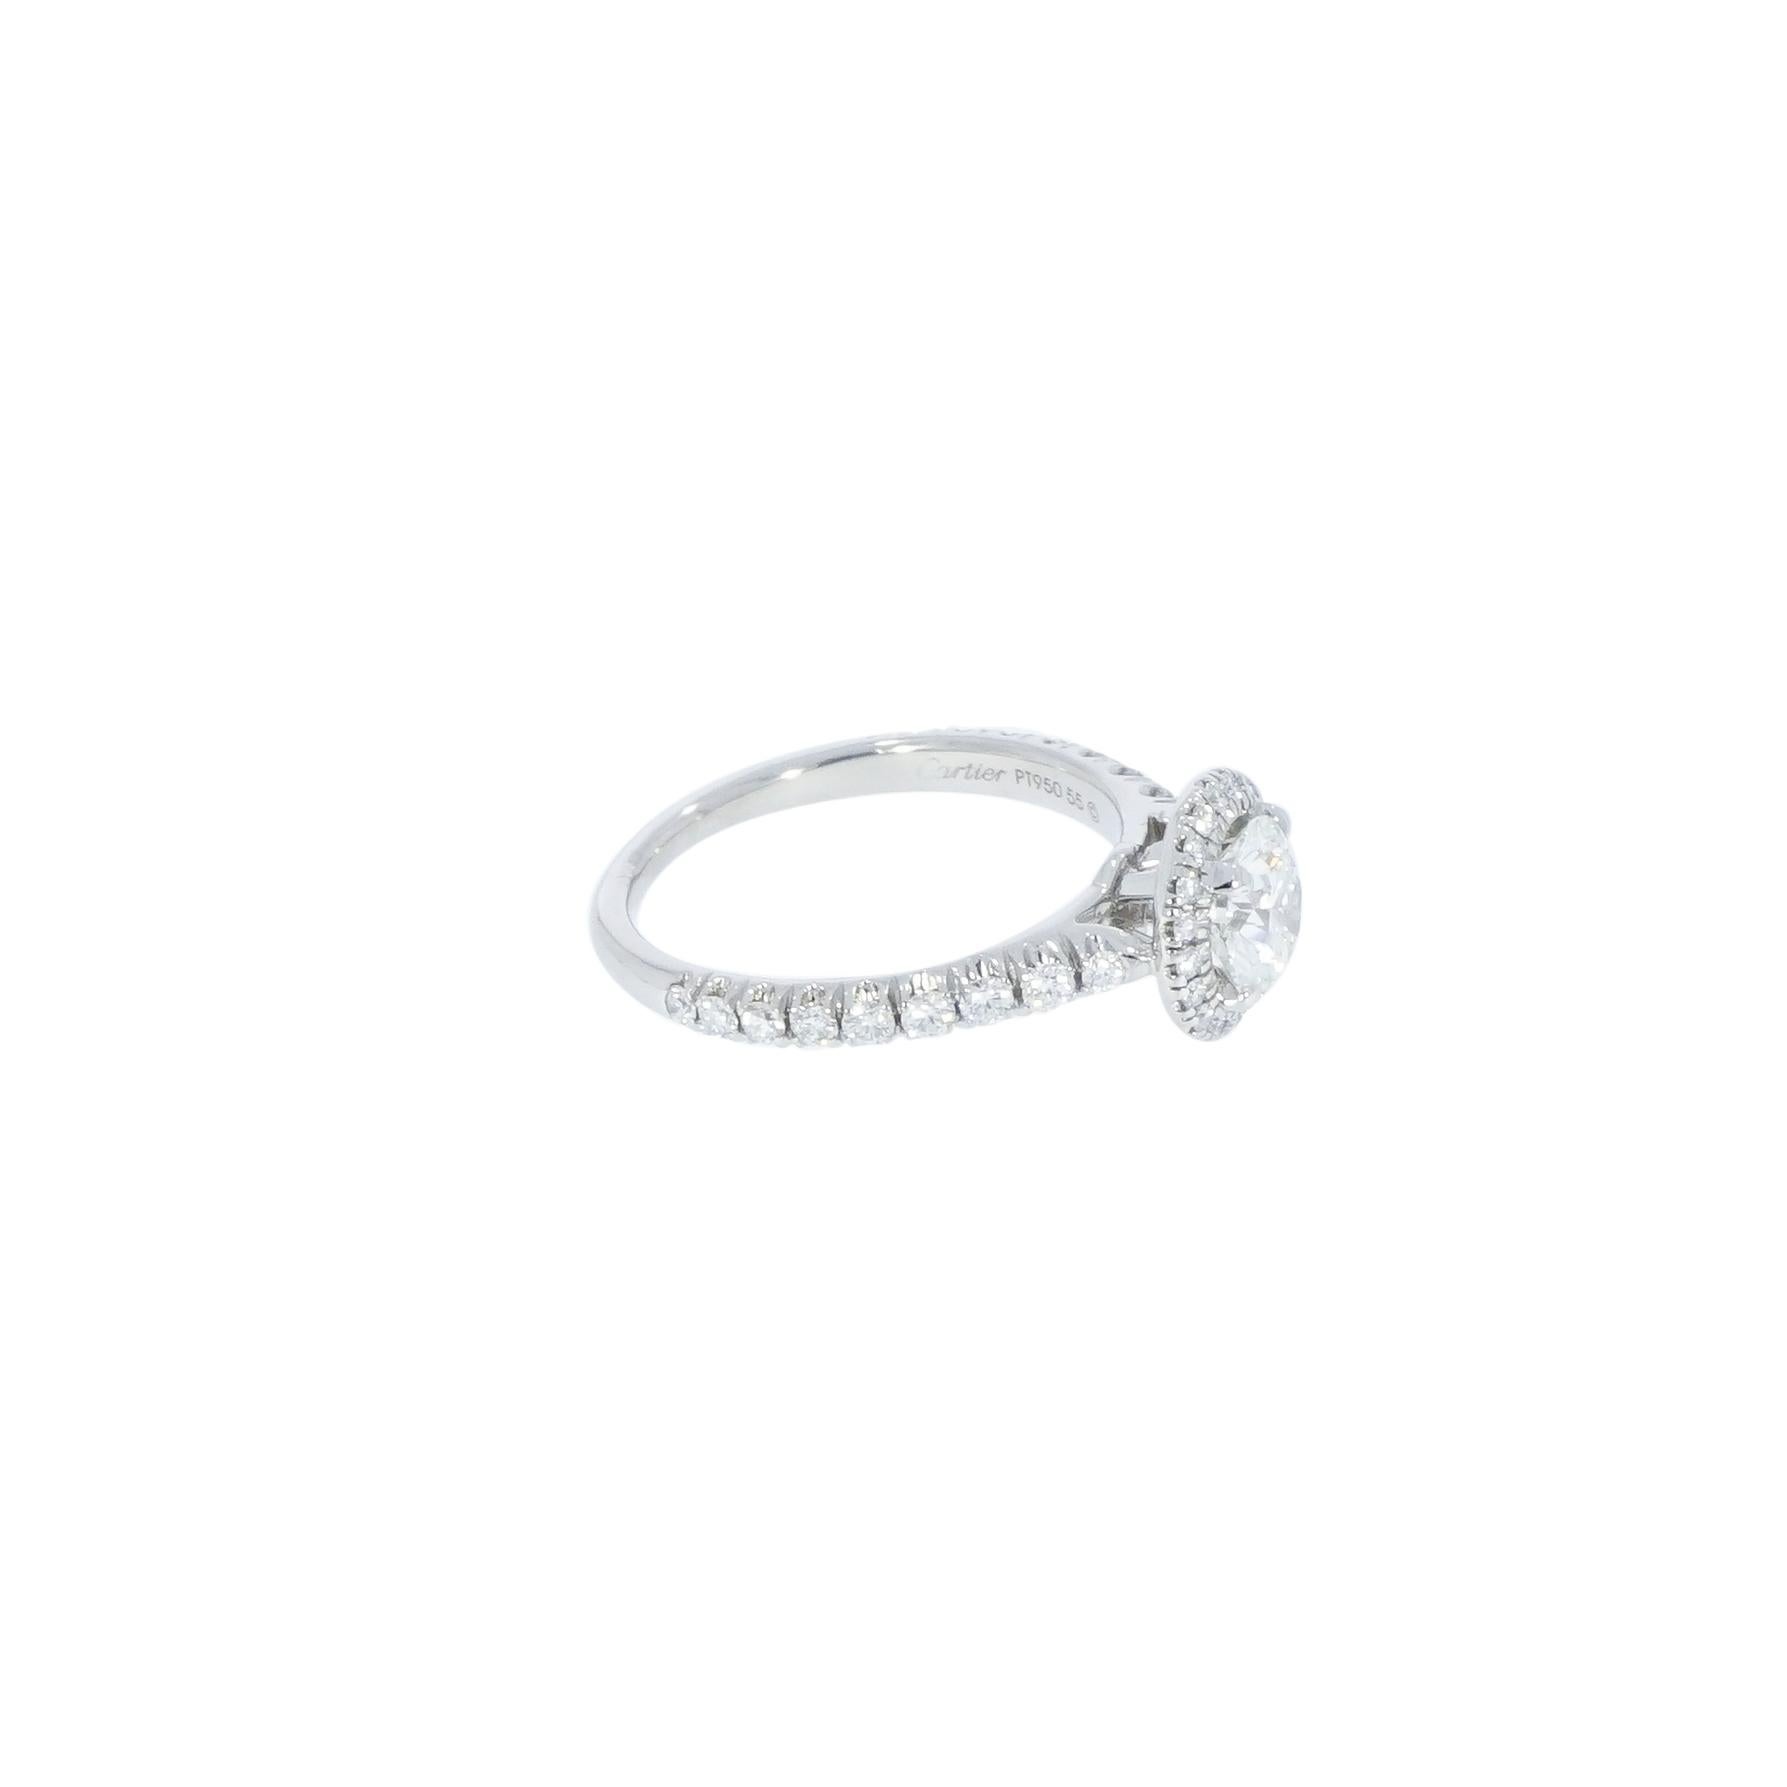 Destinée, a gorgeous Diamond Engagement Ring designed by Cartier holding a 1.03 carat round Diamond that is enhanced by a halo of diamonds which bestow an exceptional radiance. 
This ring unfolds in harmonious curves and encapsulates the promise of